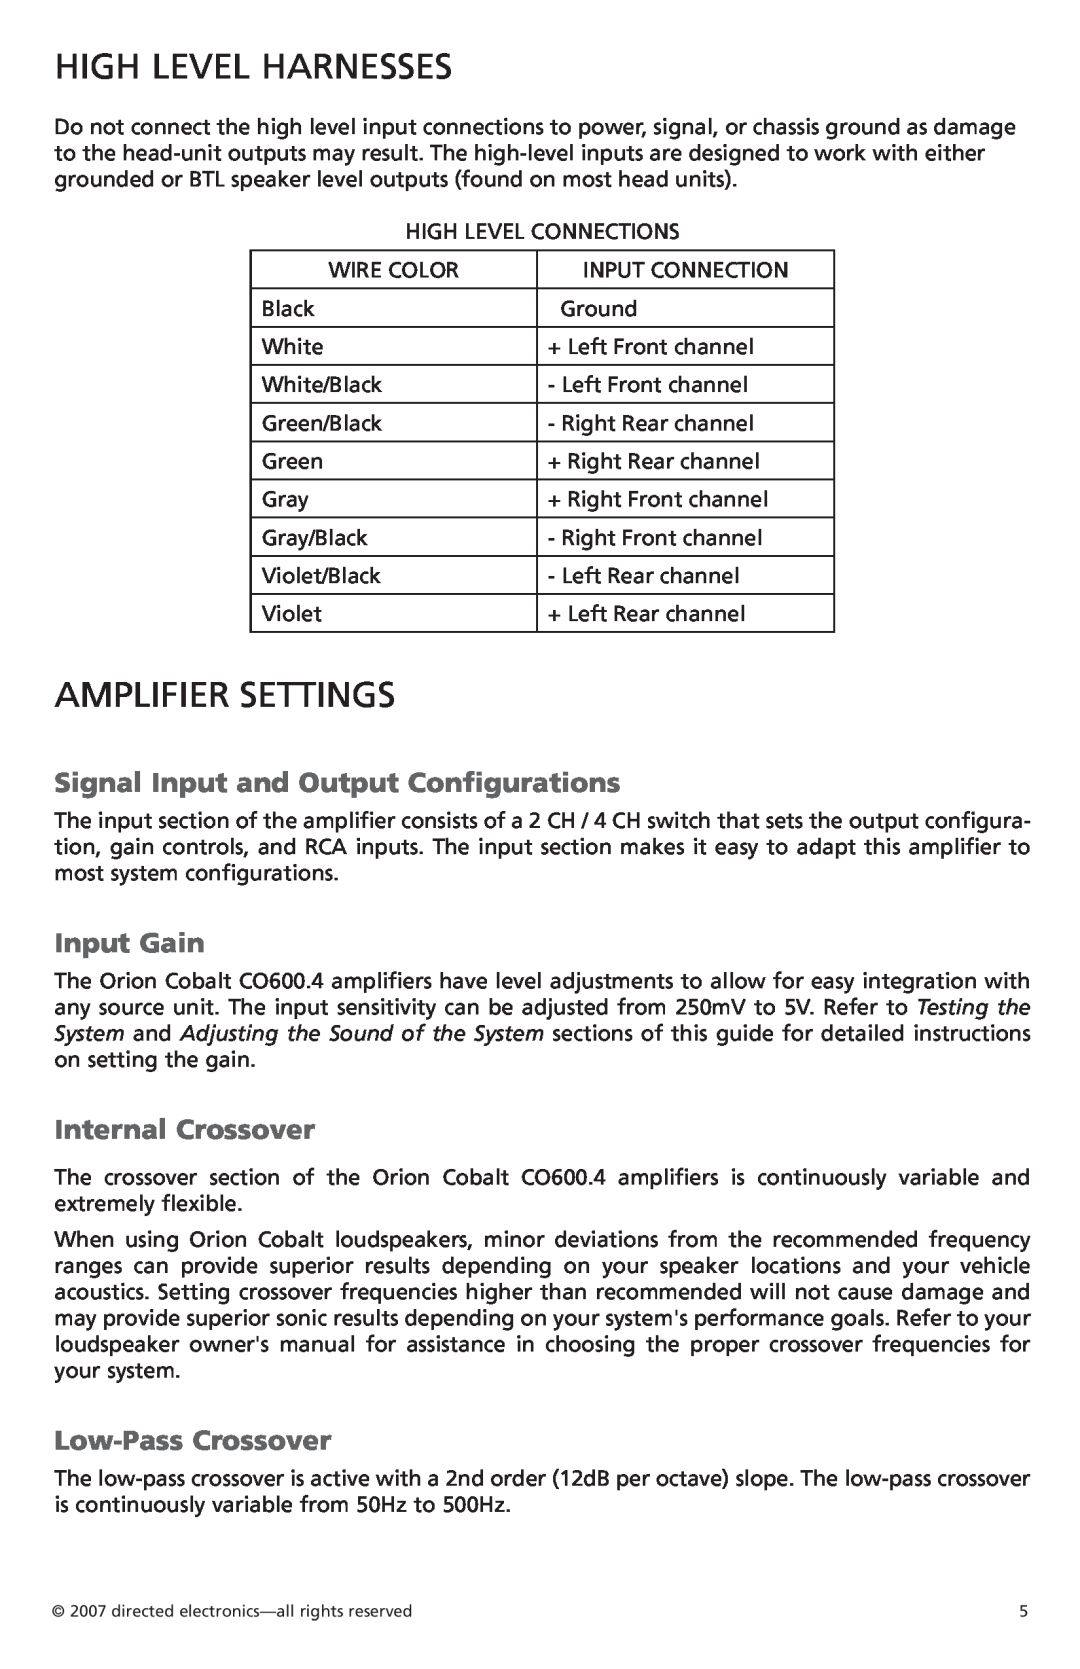 Orion G42110 owner manual High Level Harnesses, Amplifier Settings, Signal Input and Output Configurations, Input Gain 